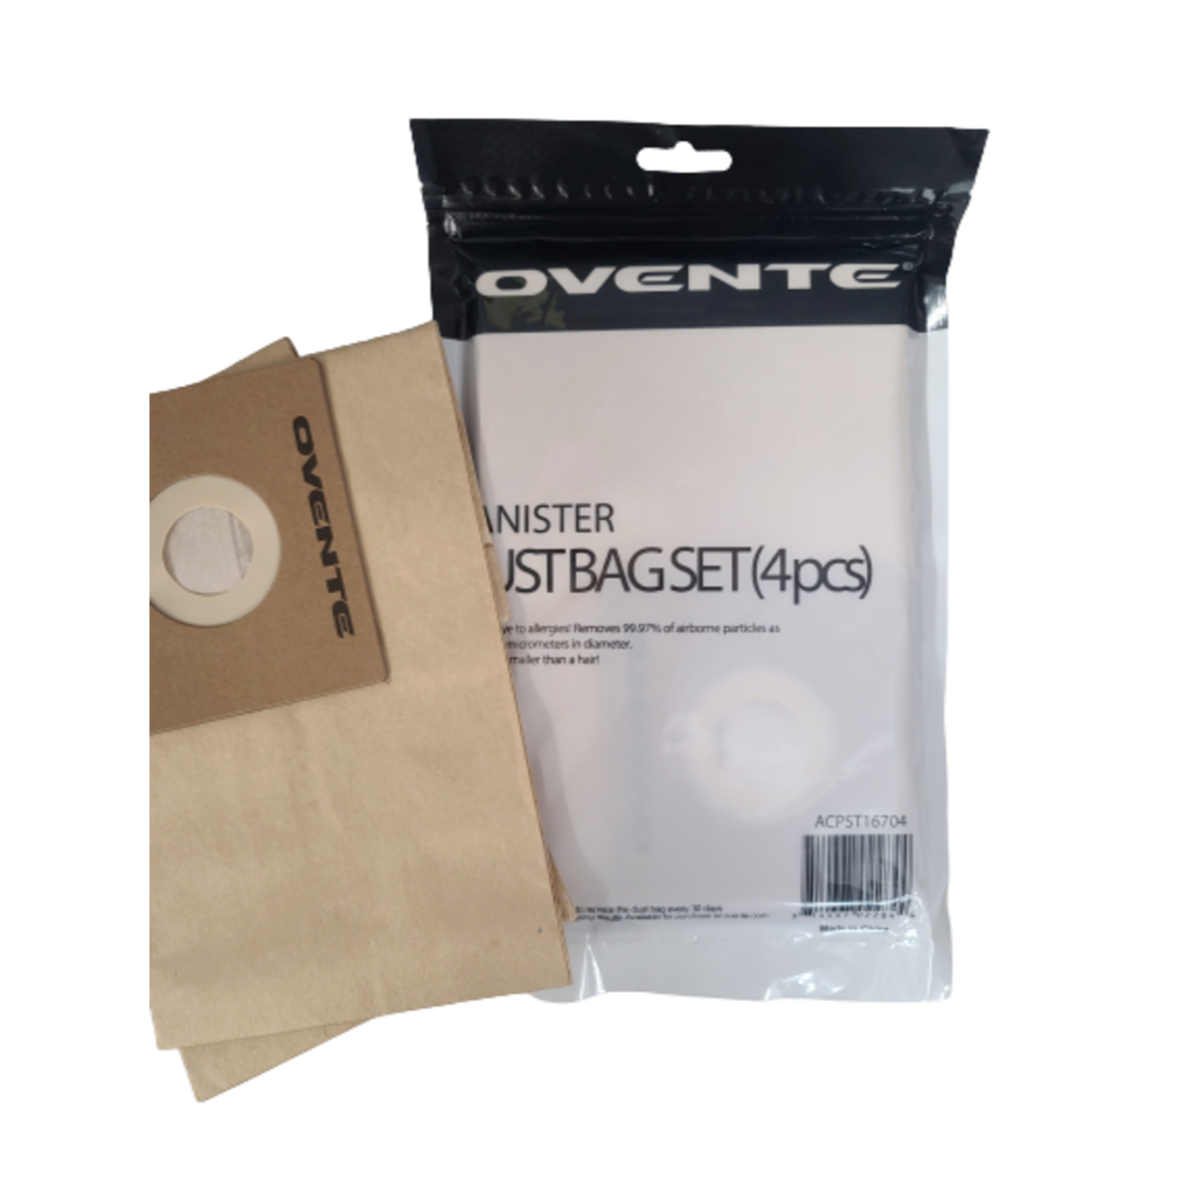 Ovente Pack of 4 Compact Dust Disposal Bags Replacement Bundle for ST1600 Canister Vacuum Cleaner Series with Bonus of 1 Premium Filter Ultra Filtration of Small Particles, Brown ACPST16041 - image 3 of 7